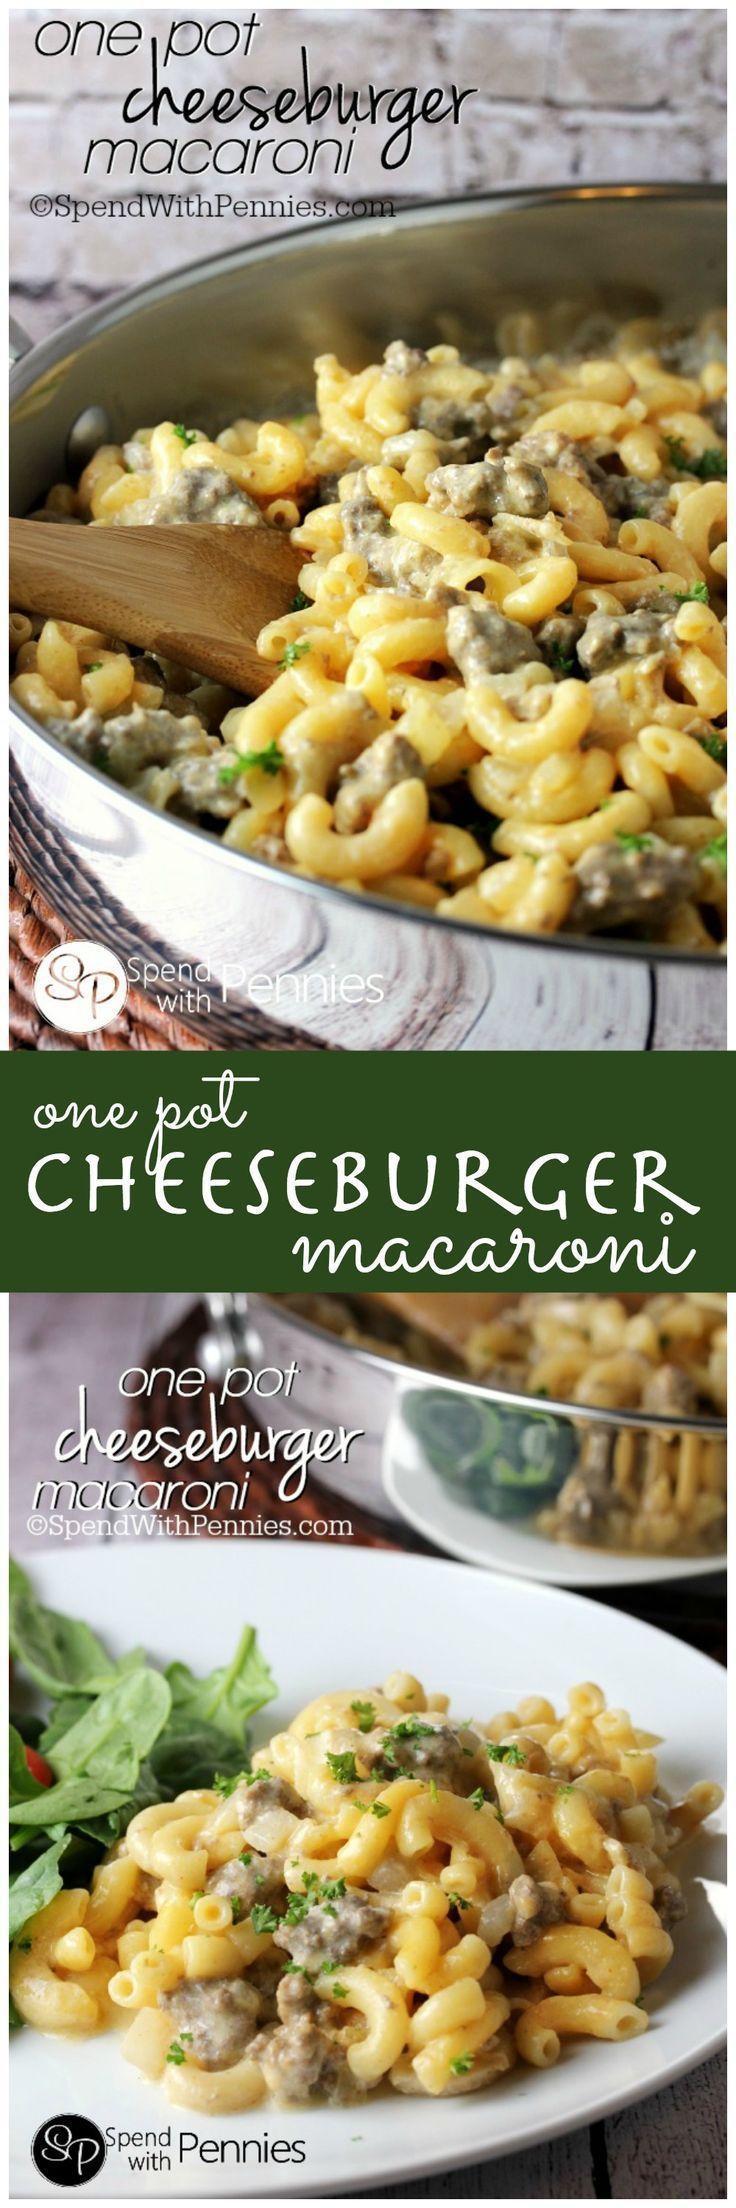 One Pot Cheeseburger Macaroni!  So easy and delicious, you’ll never buy boxed again!